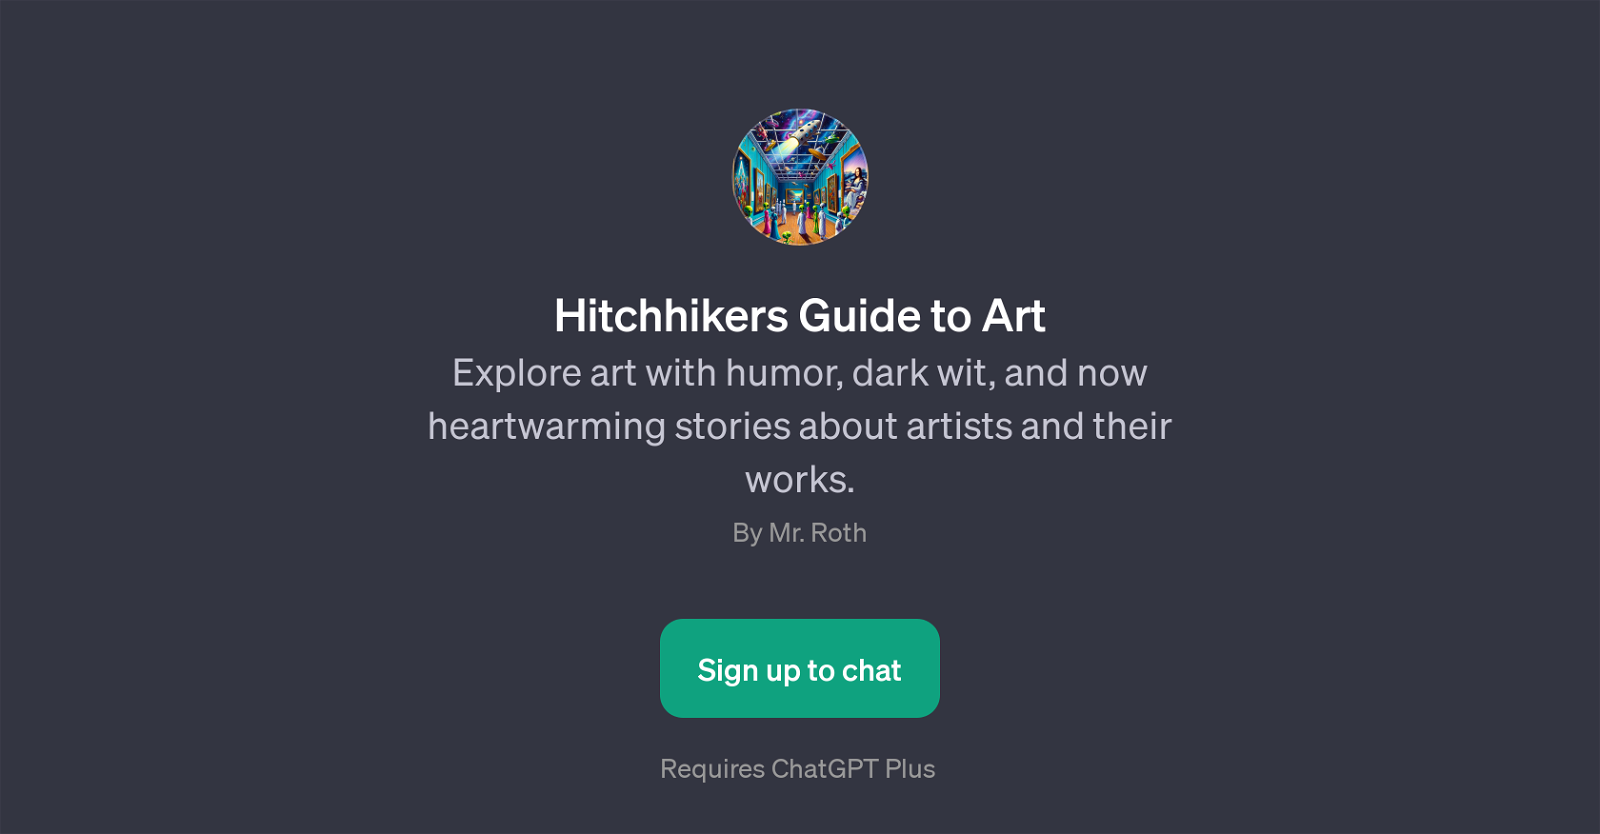 Hitchhikers Guide to Art website